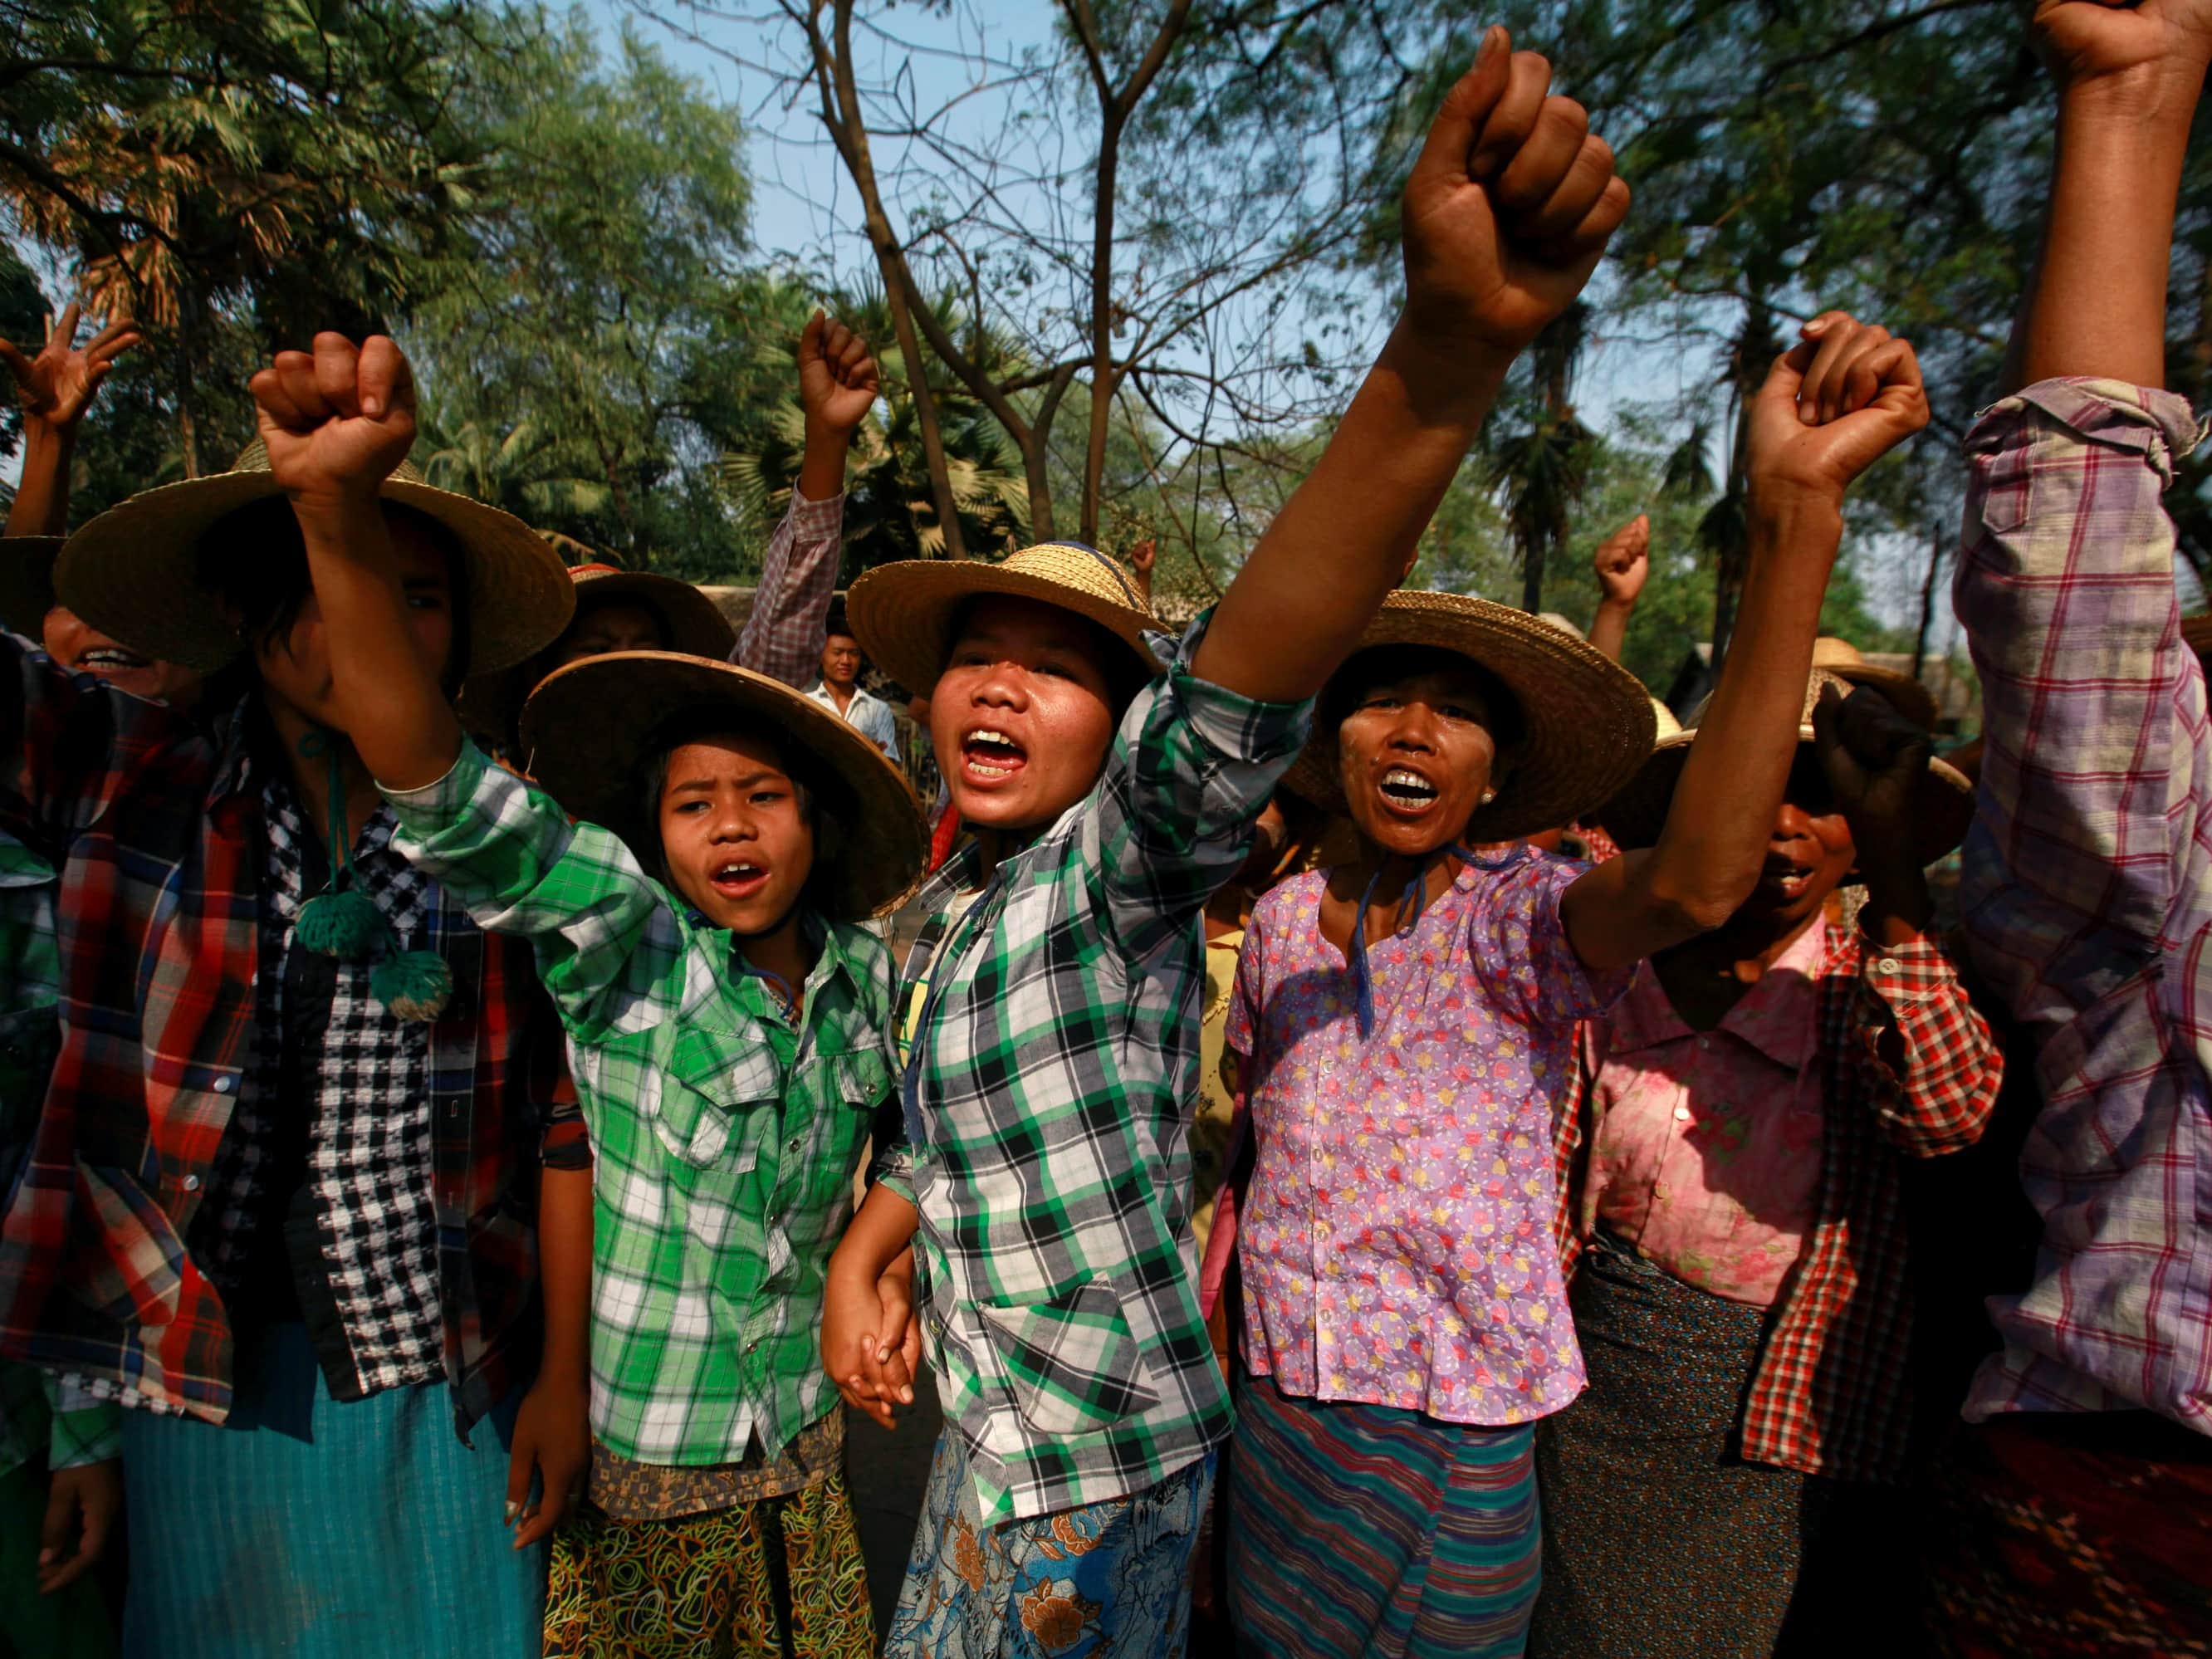 Villagers protest a copper mine project in the Latpadaung region in March 2013, REUTERS/Soe Zeya Tun